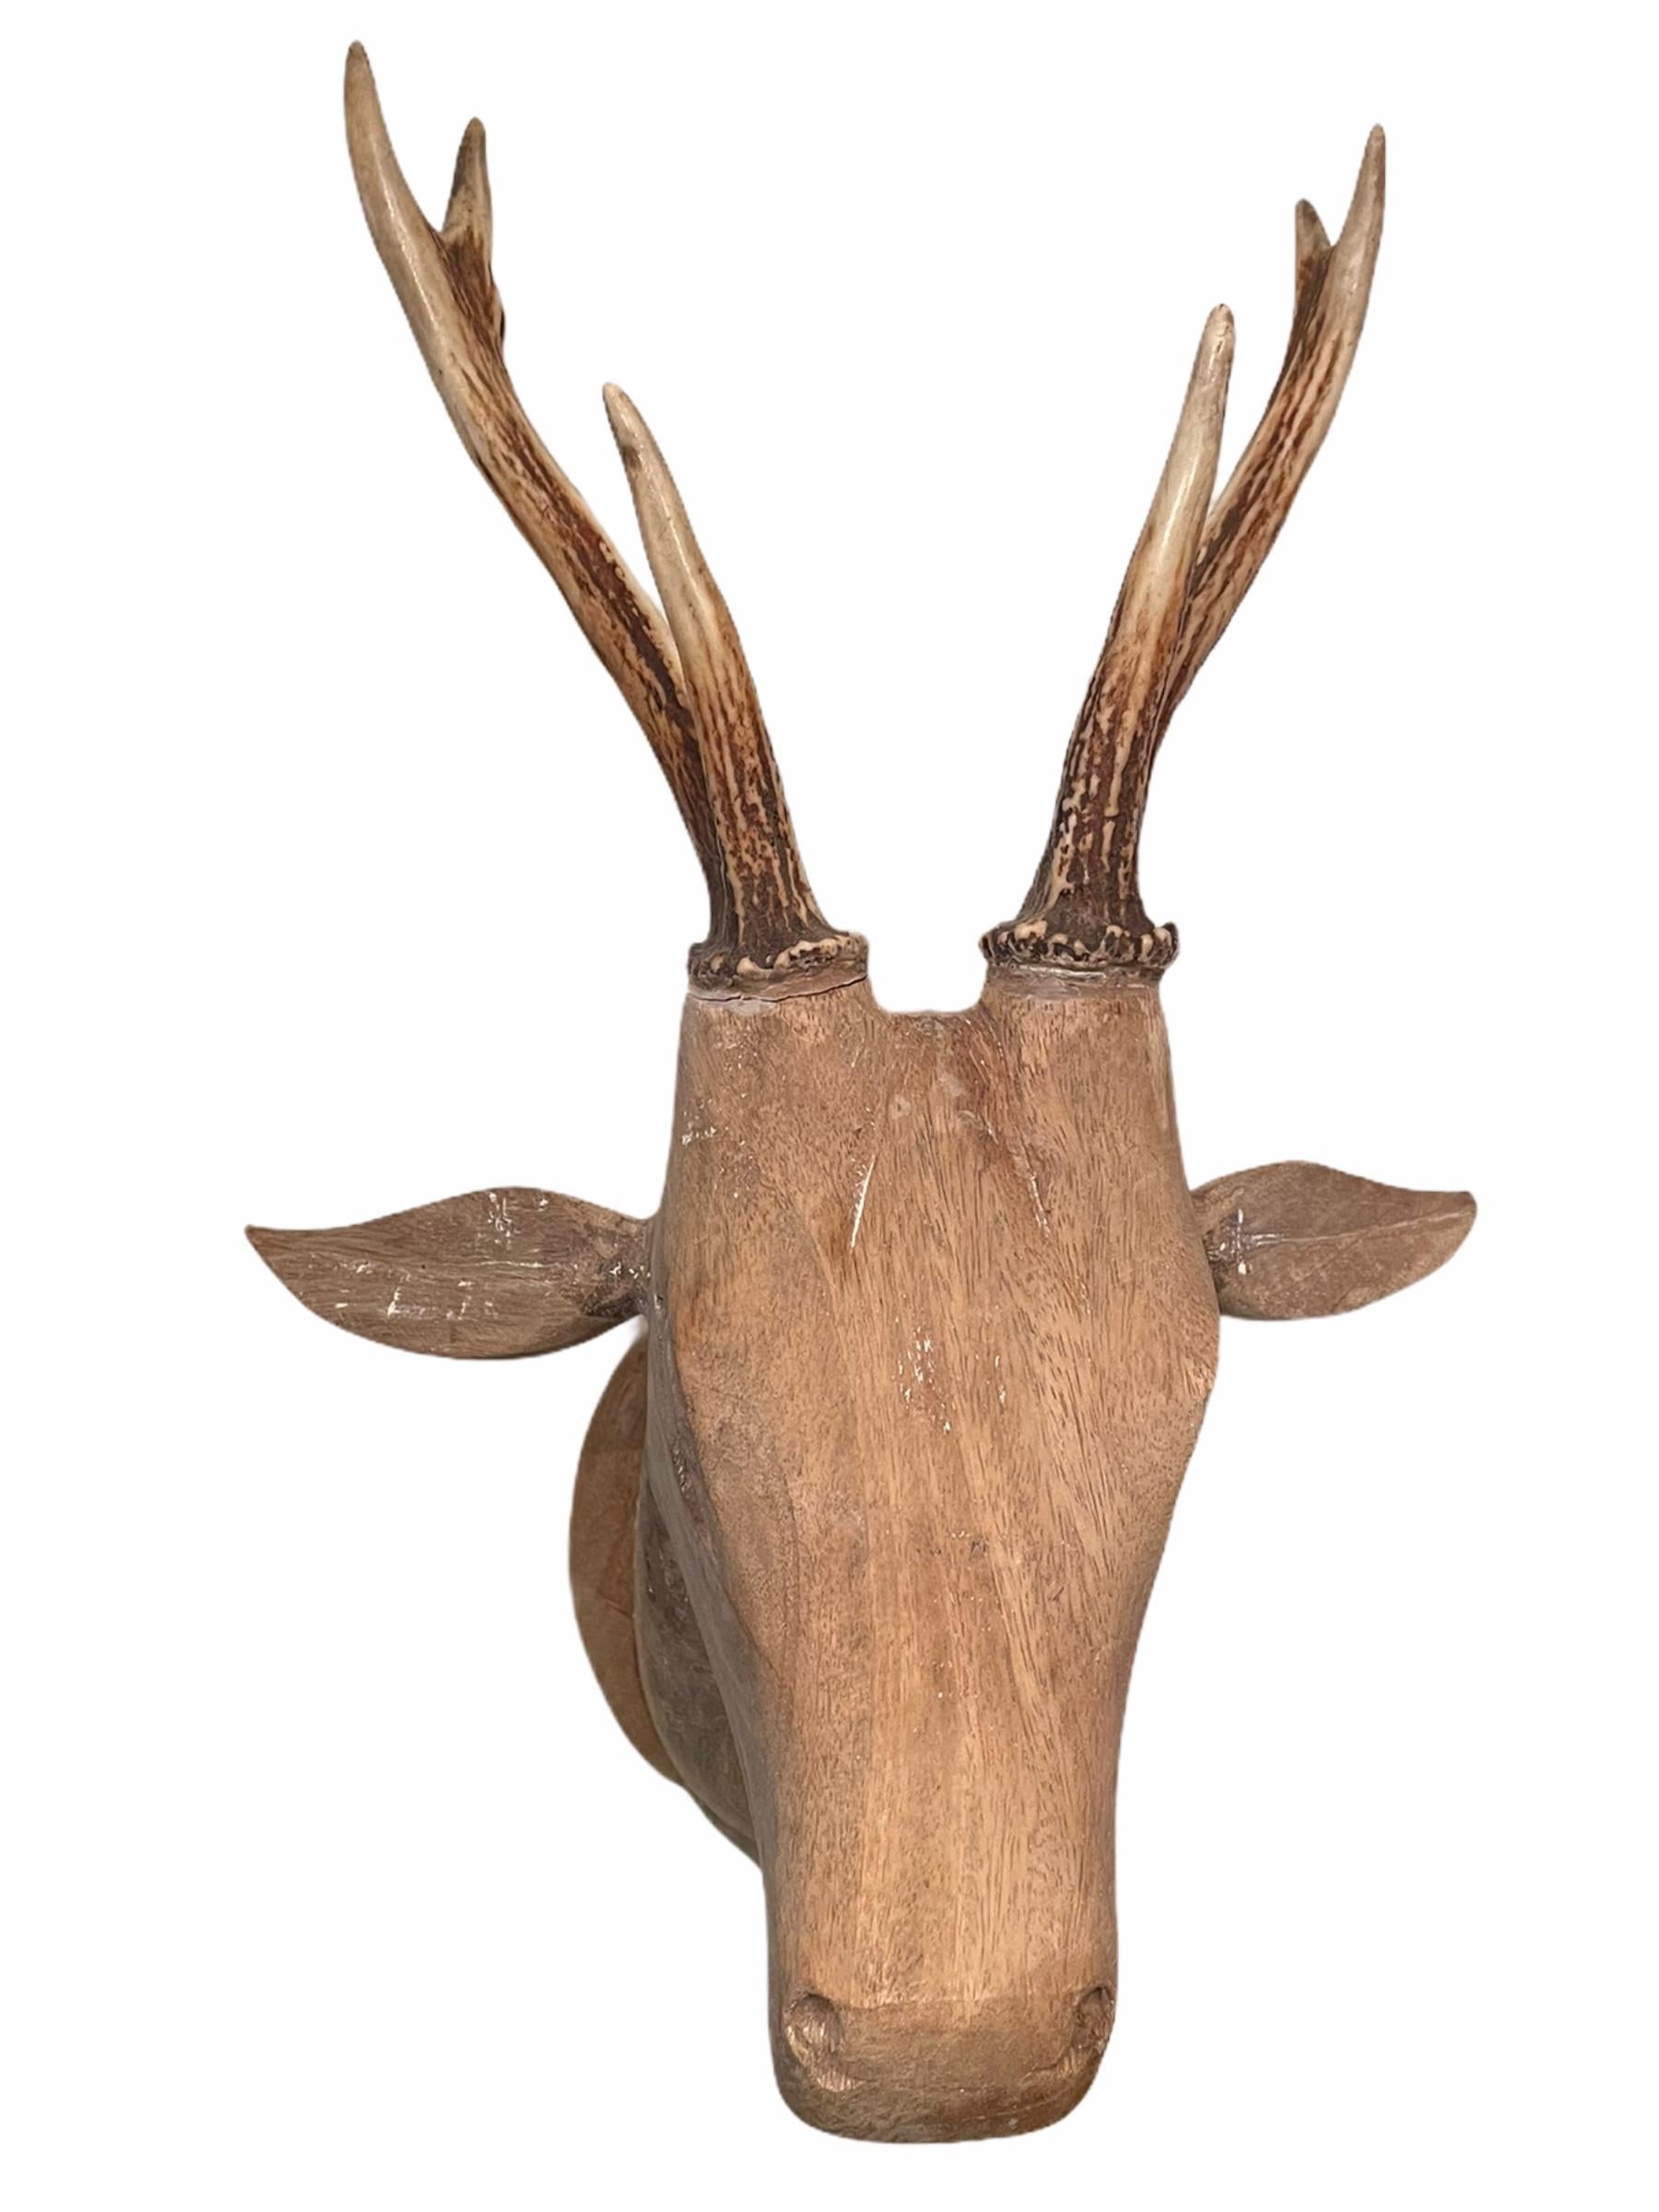 Black Forest Large Folk Art Carved Wood Deer Head with Real Antlers, 19th Century